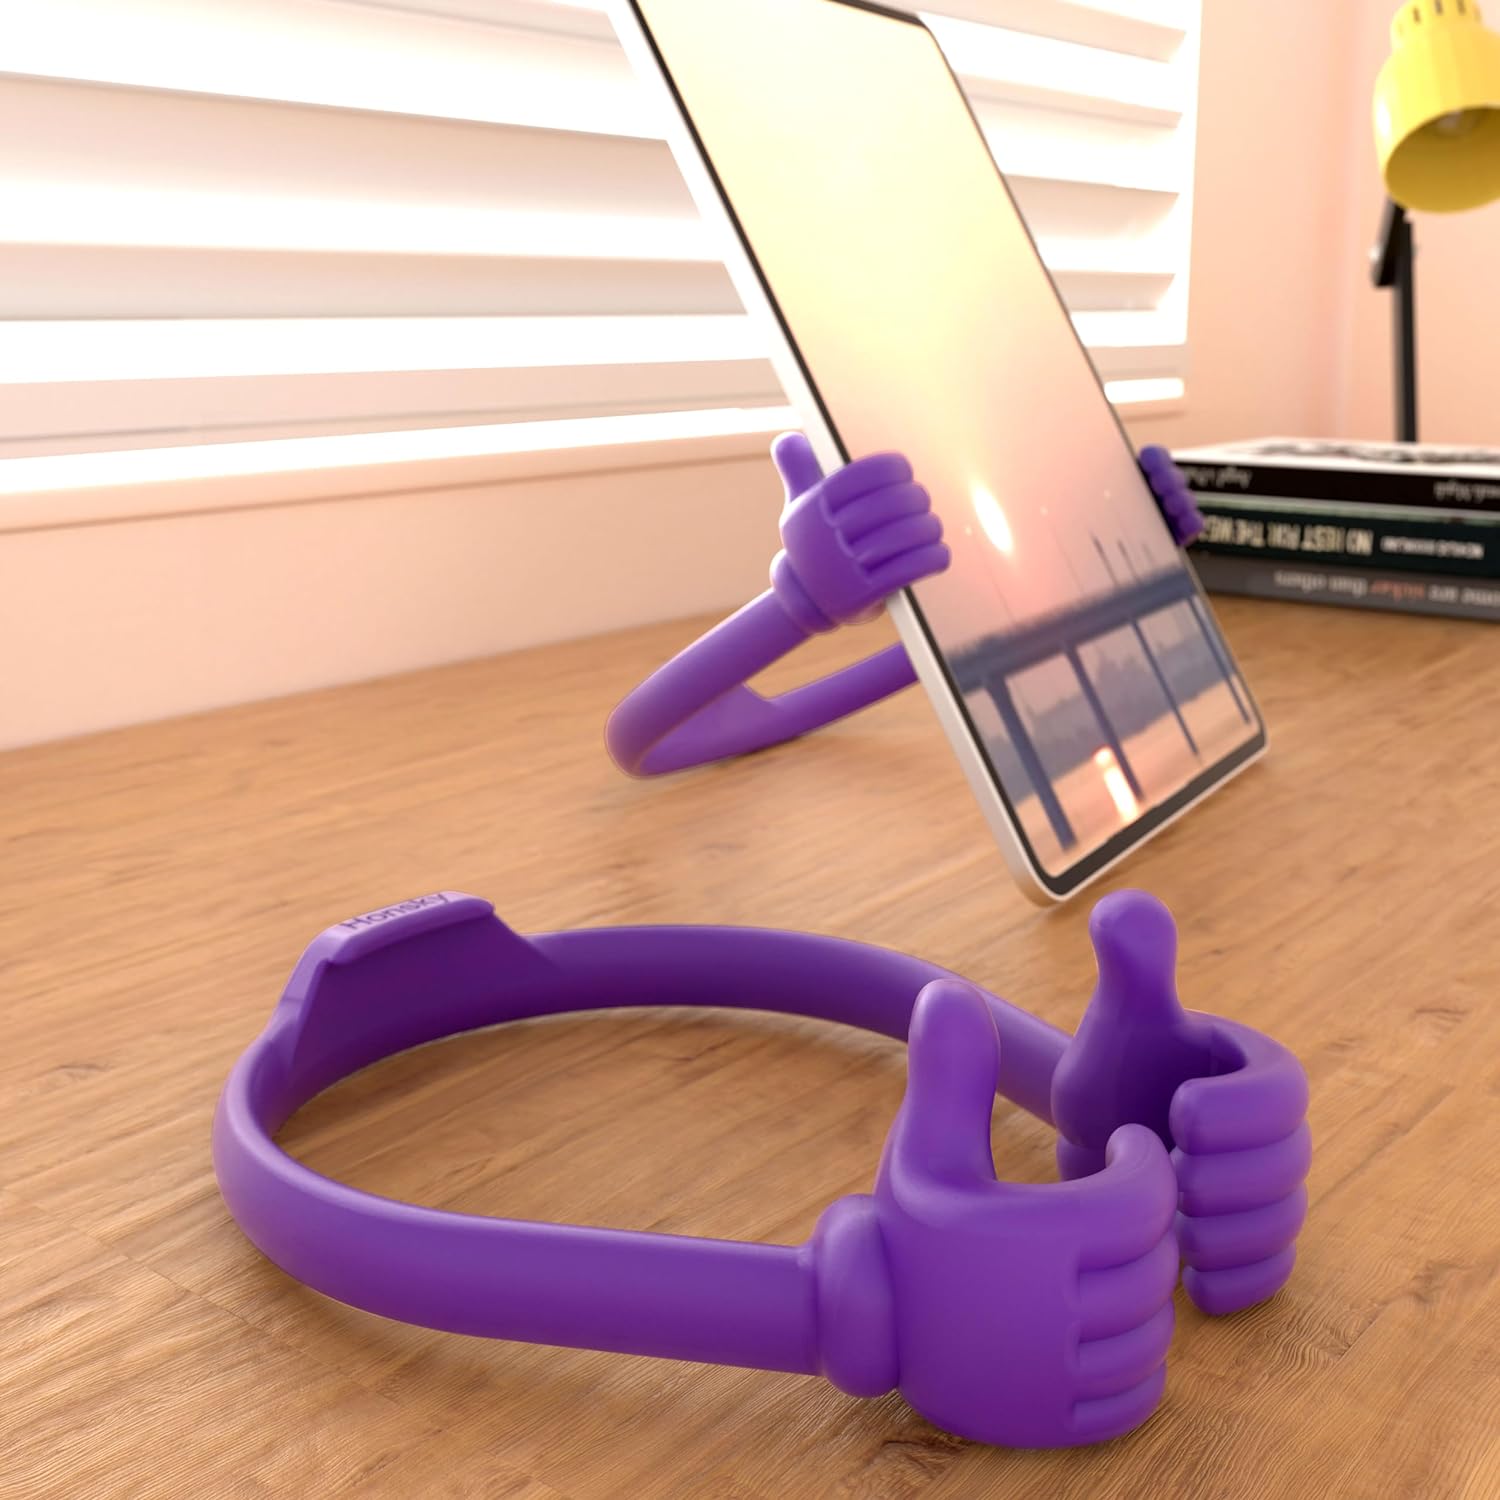 Adjustable phone stand that looks like two thumbs up, empty and holding a tablet